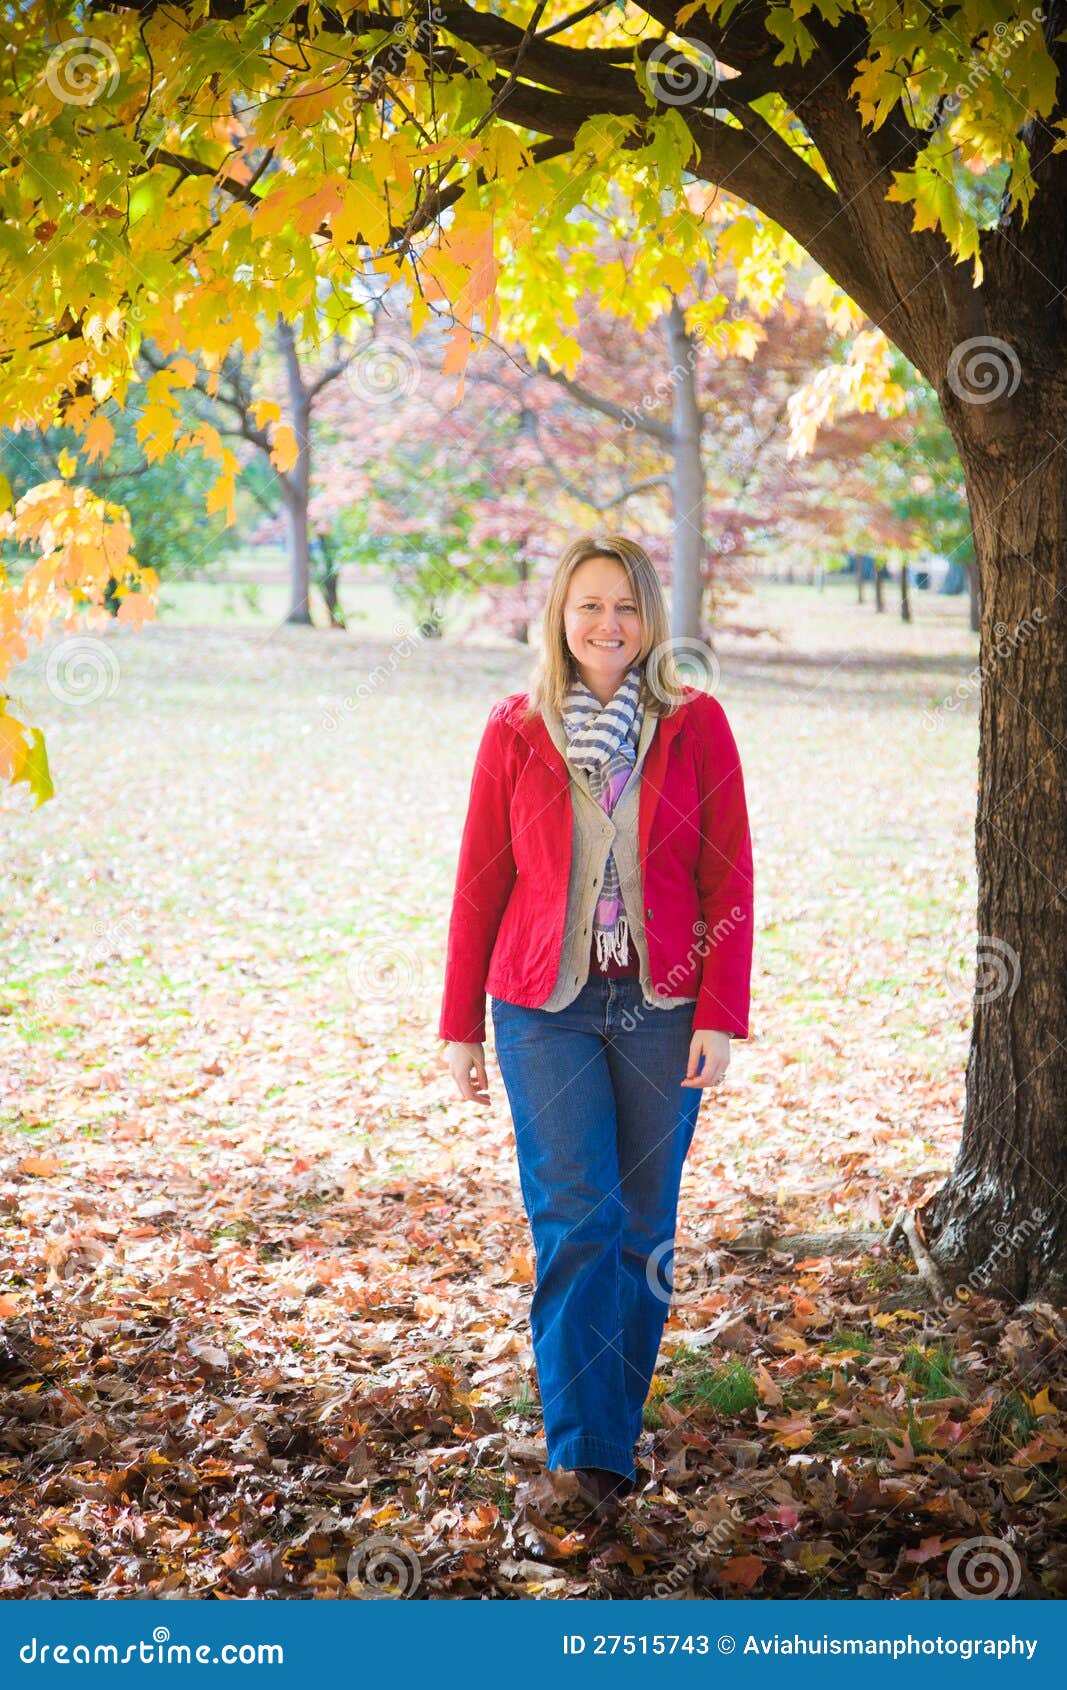 A Walk in the Woods stock image. Image of color, healthy - 27515743